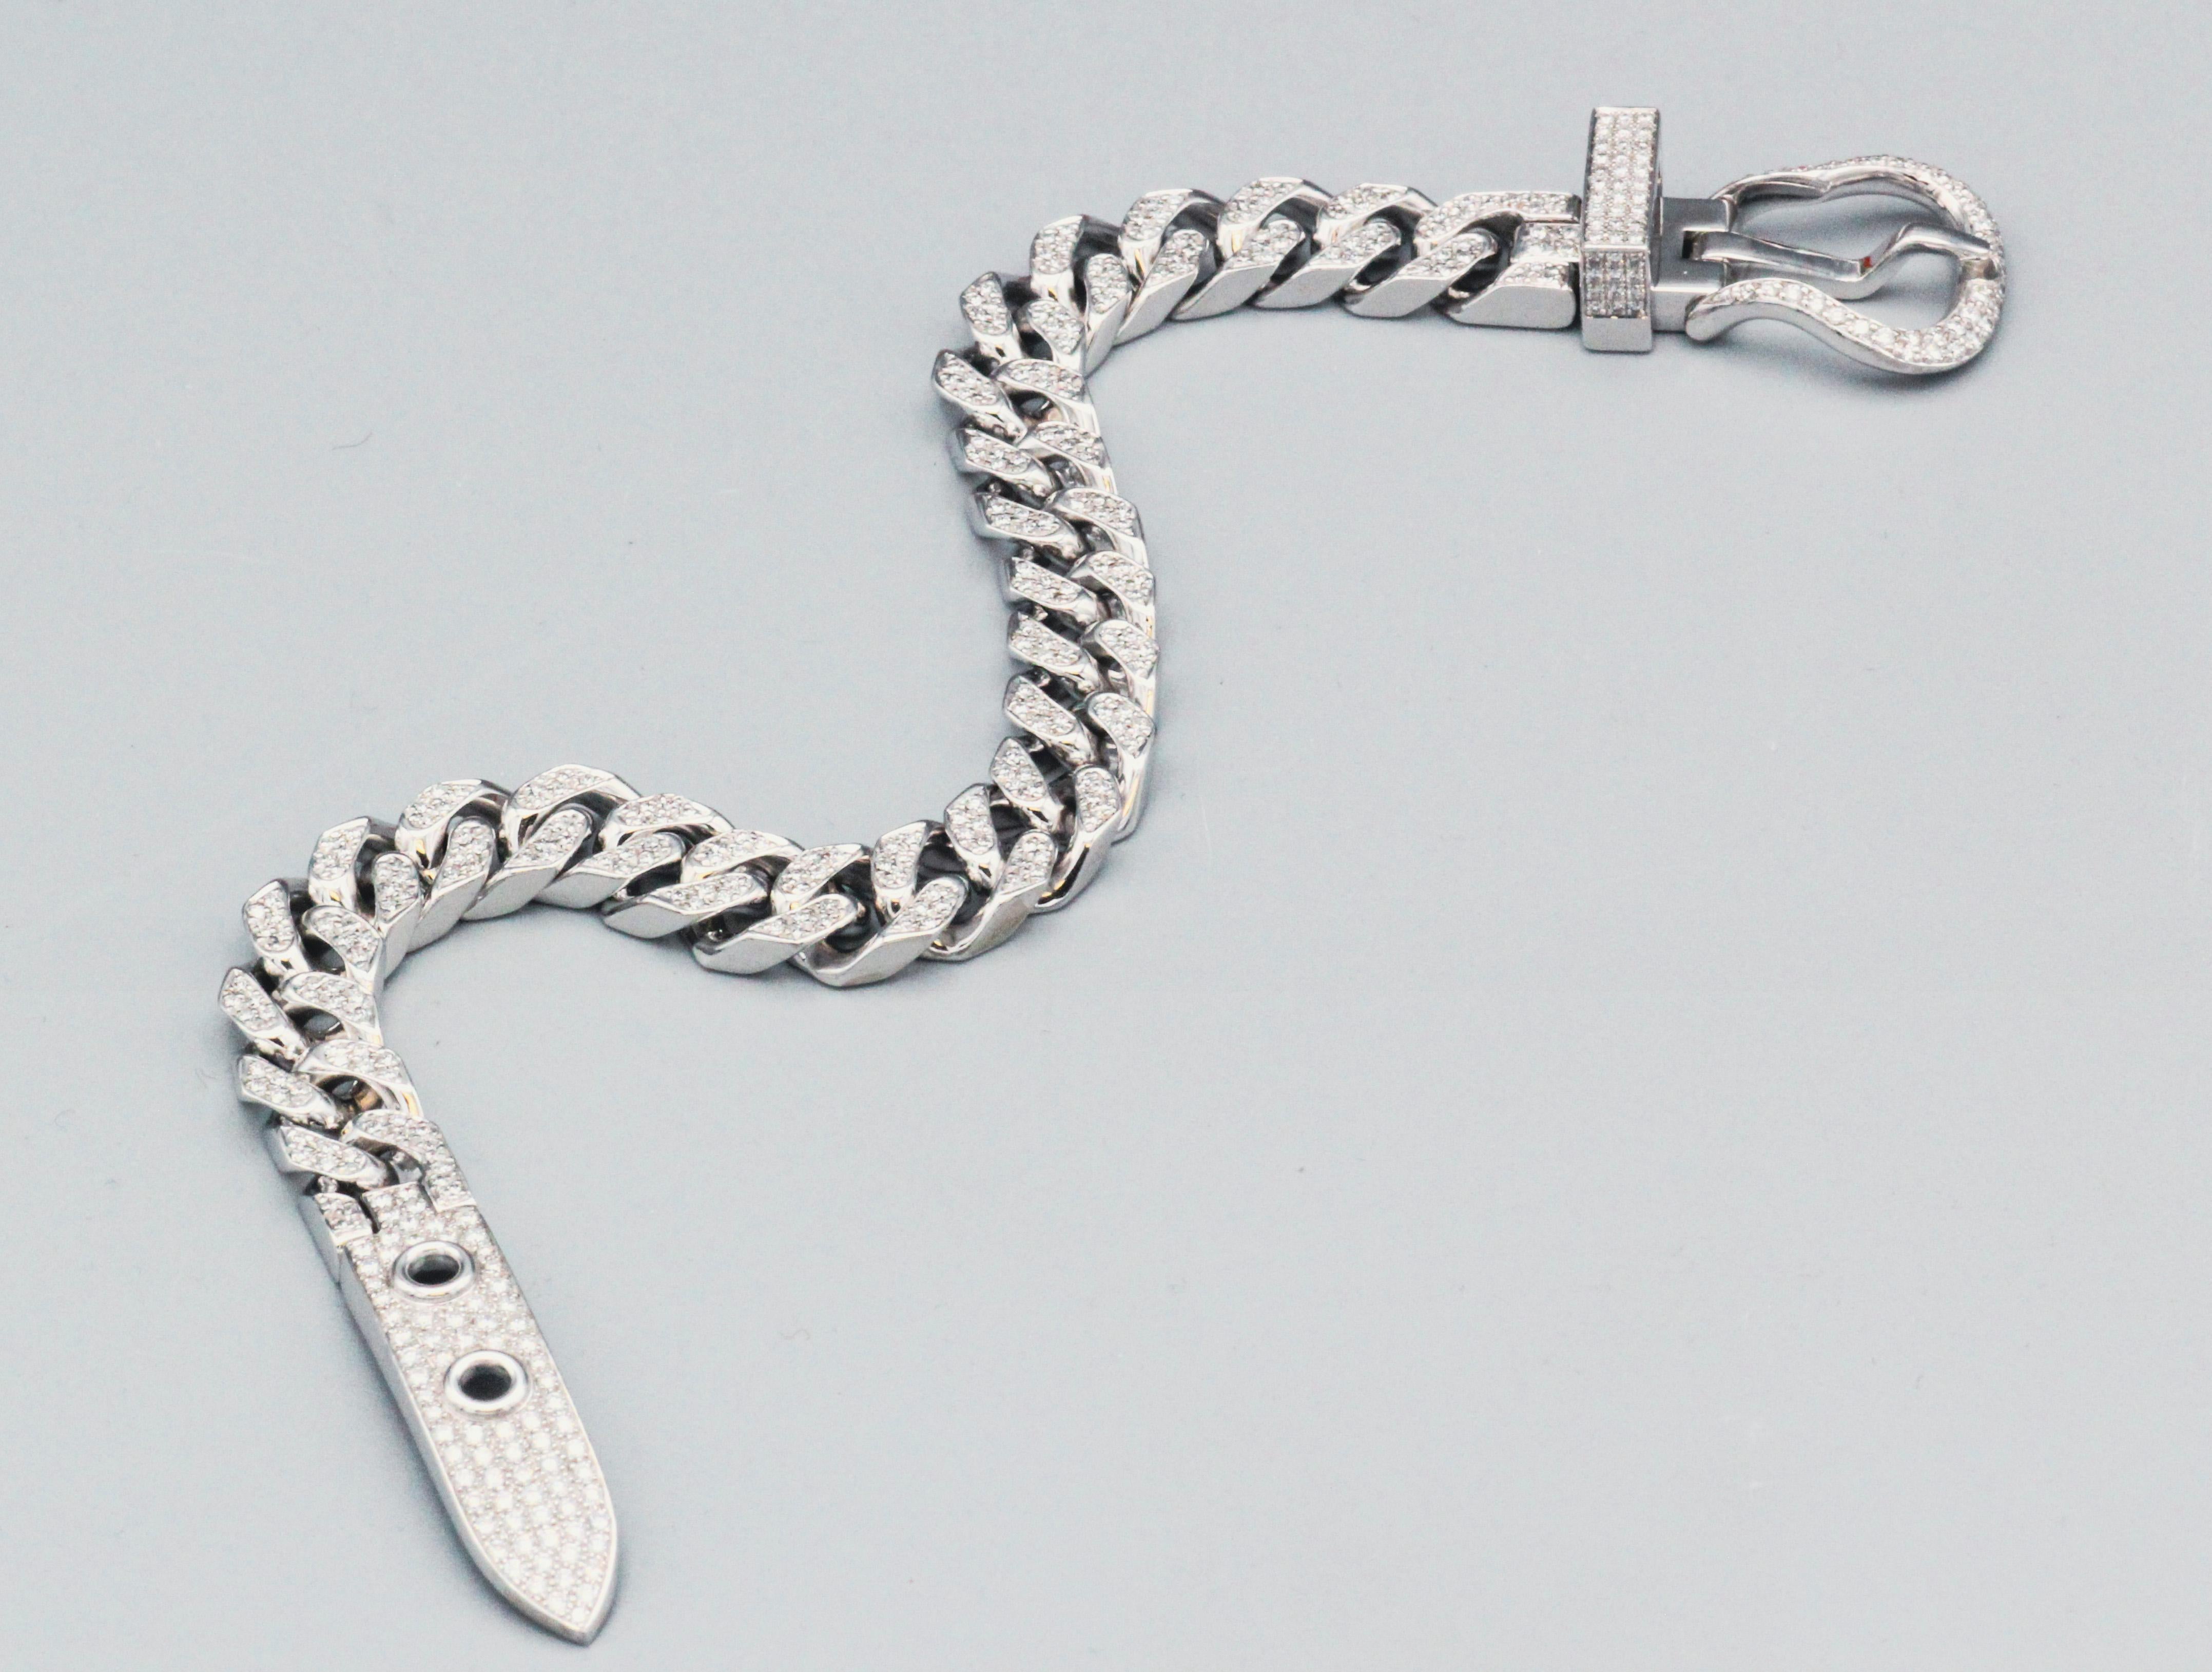 Hermès Boucle Sellier Diamond 18 Karat White Gold Buckle Bracelet In Excellent Condition For Sale In New York, NY